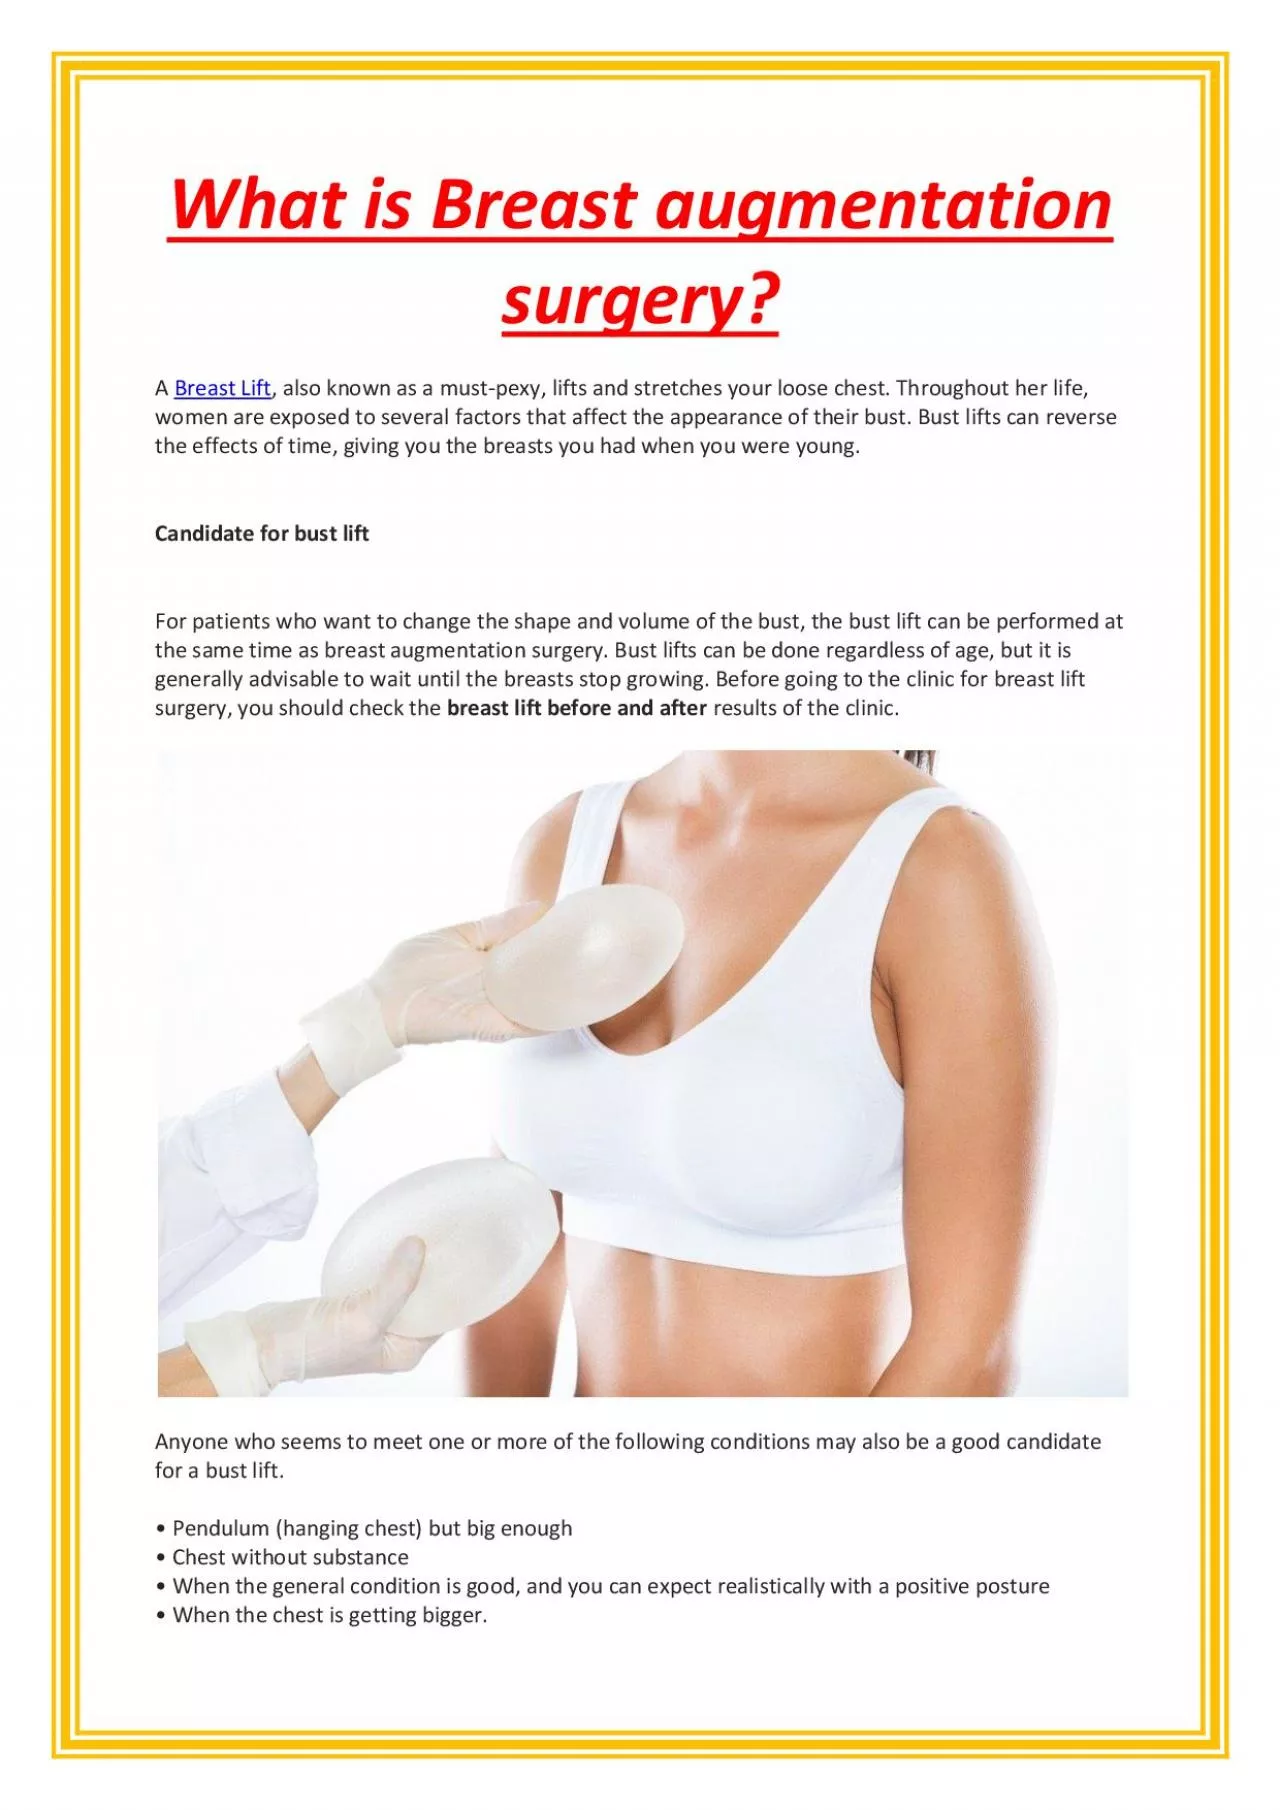 What is Breast augmentation surgery?